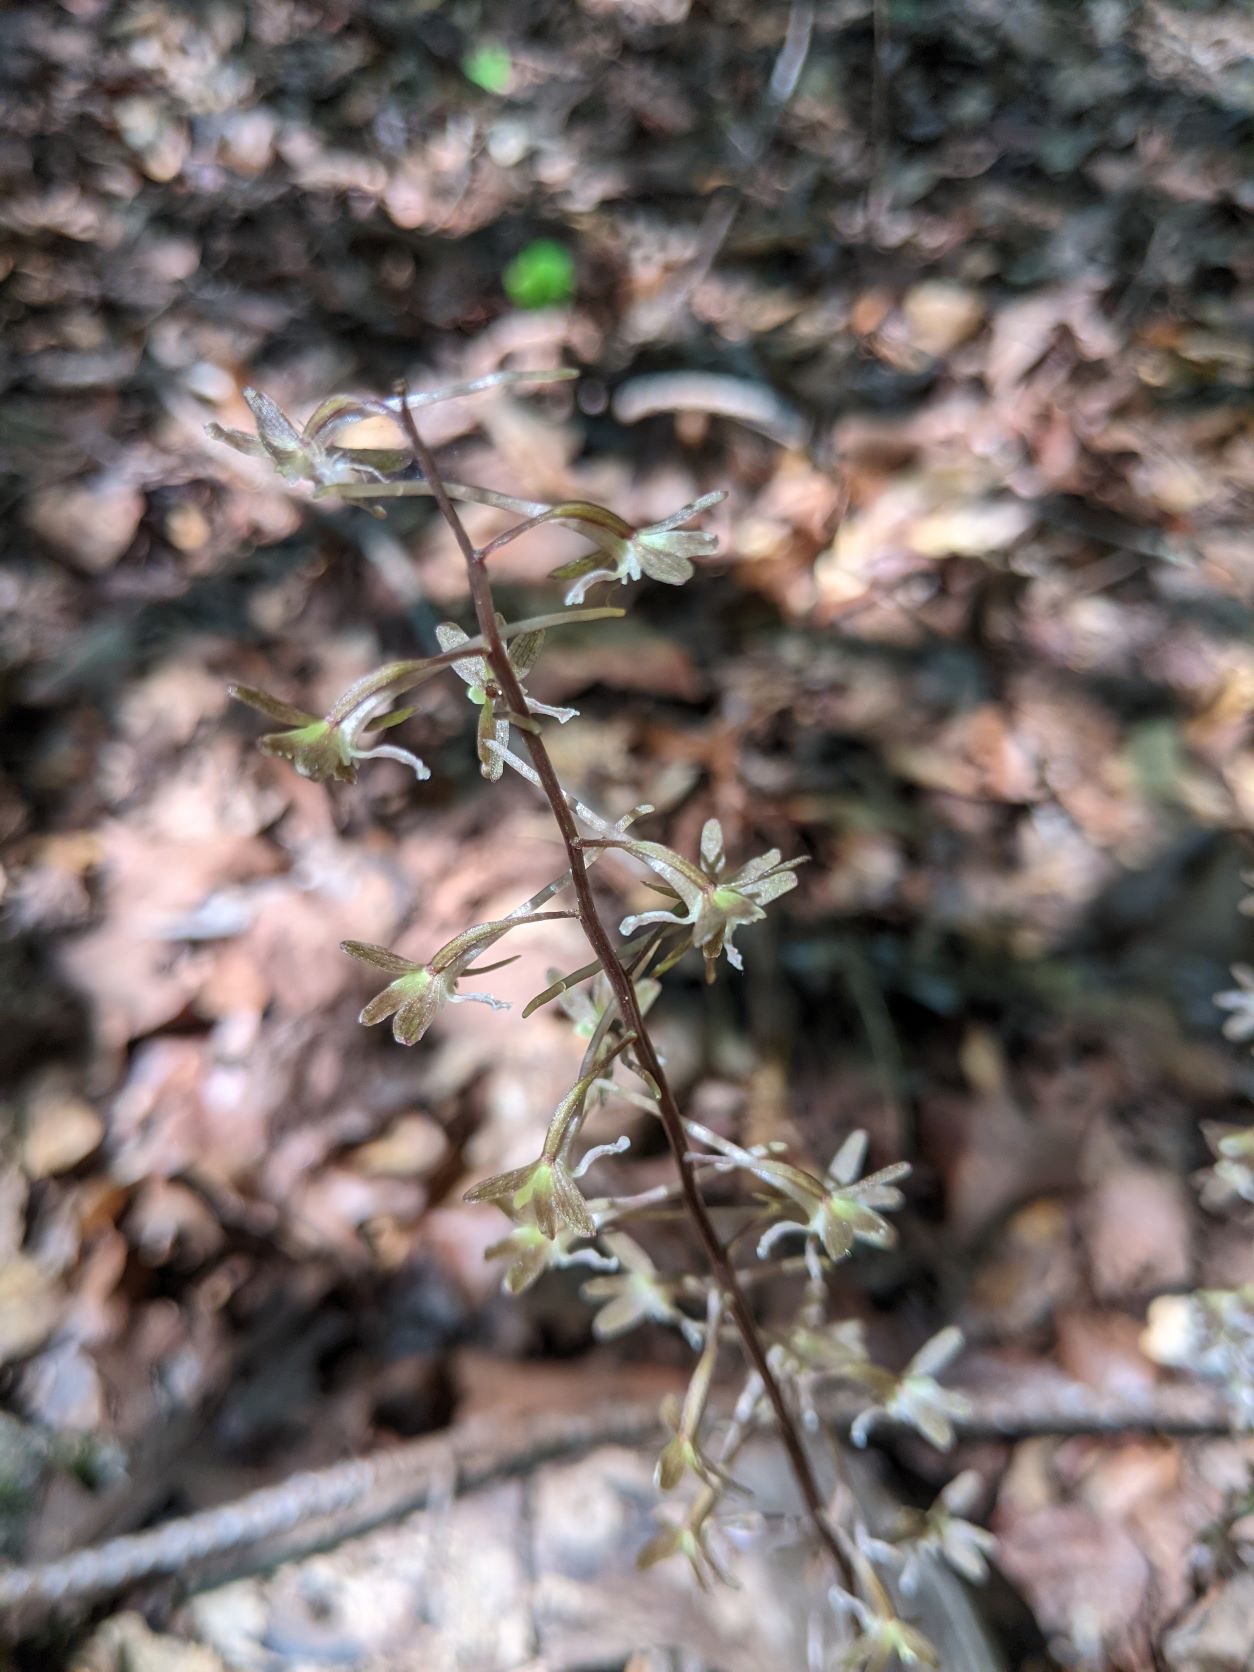 Crane-Fly Orchid flowers - small, greenish flowers on a leafless stalk